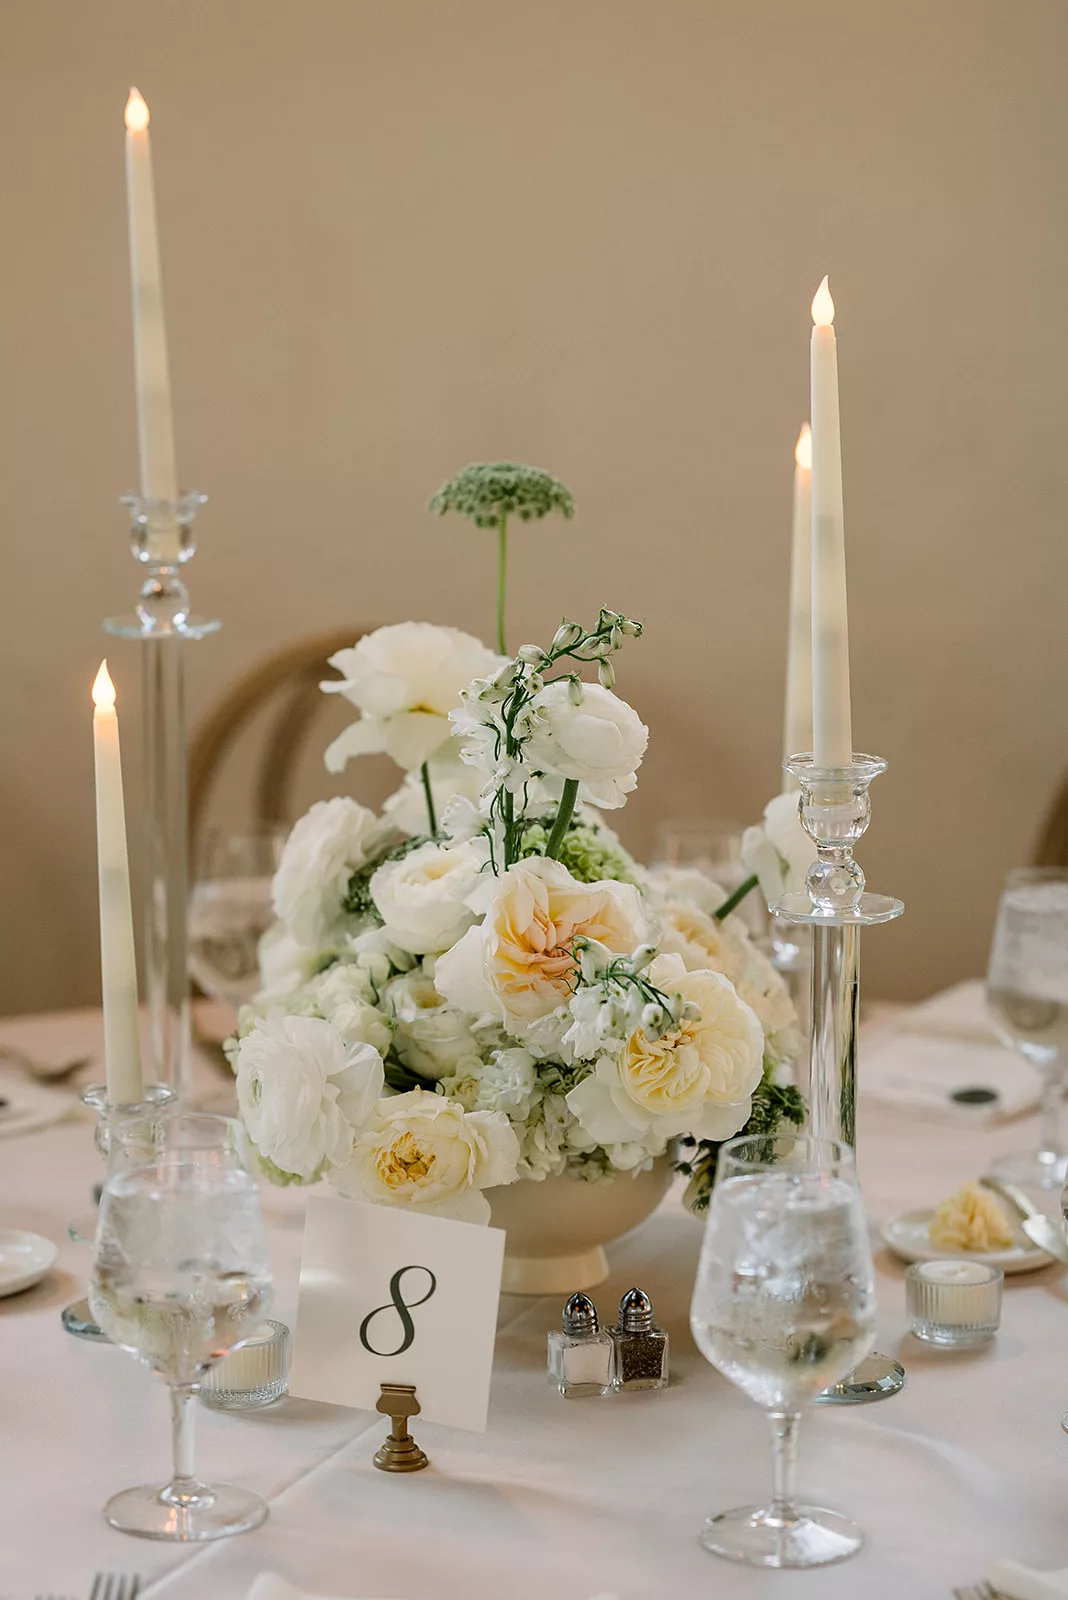 Details of a white rose centerpiece for a wedding reception